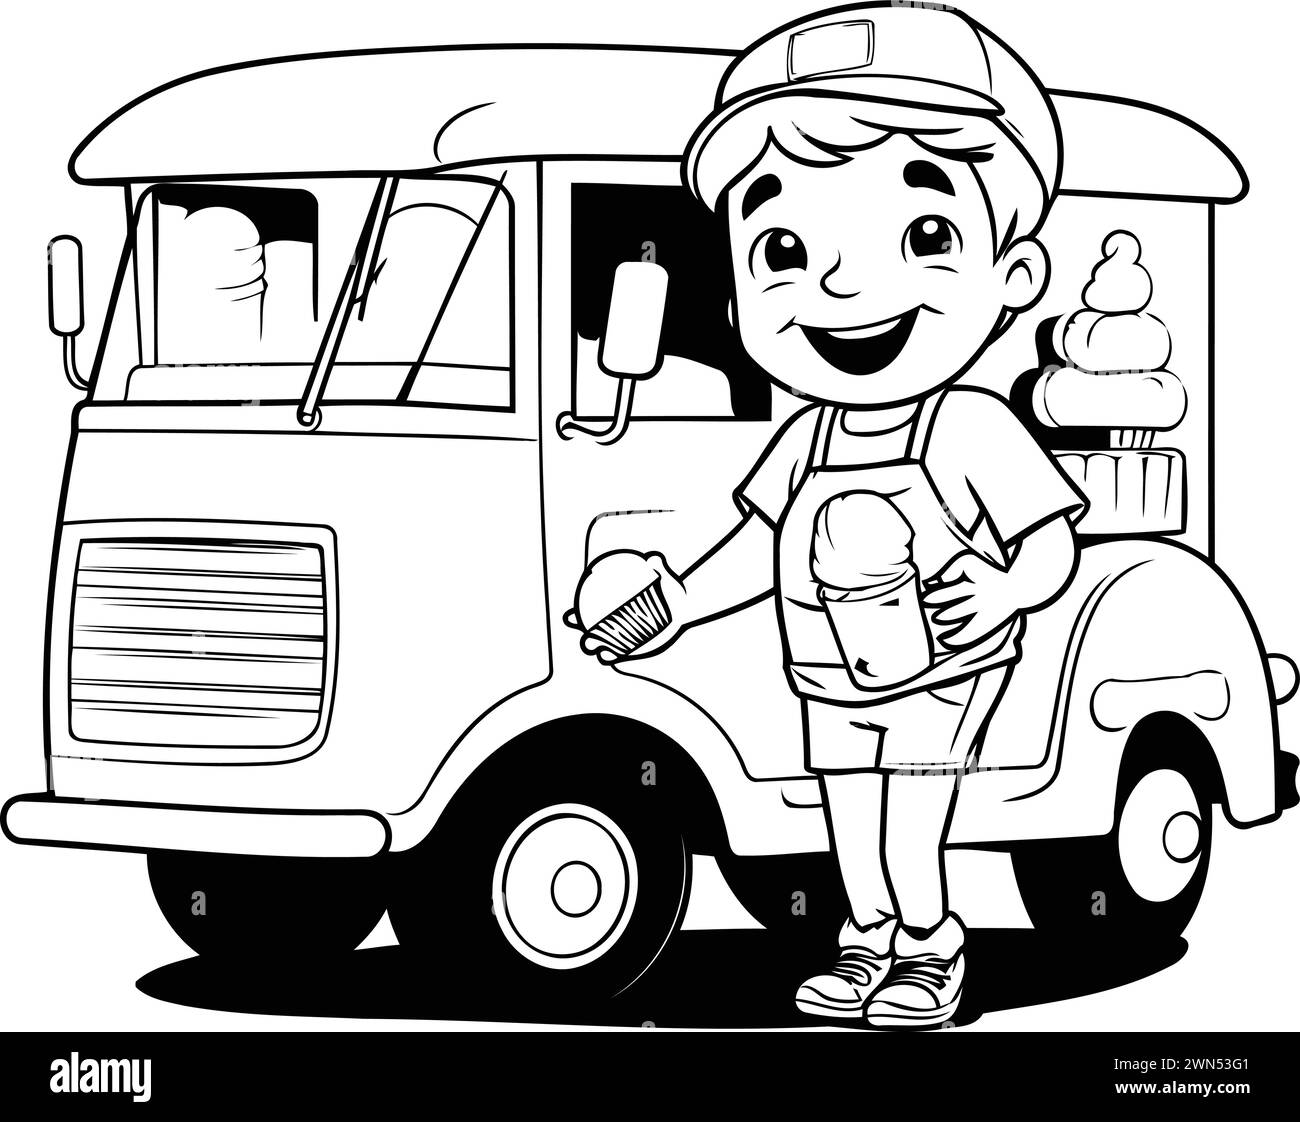 Cute cartoon boy with ice cream truck. Black and white vector illustration. Stock Vector